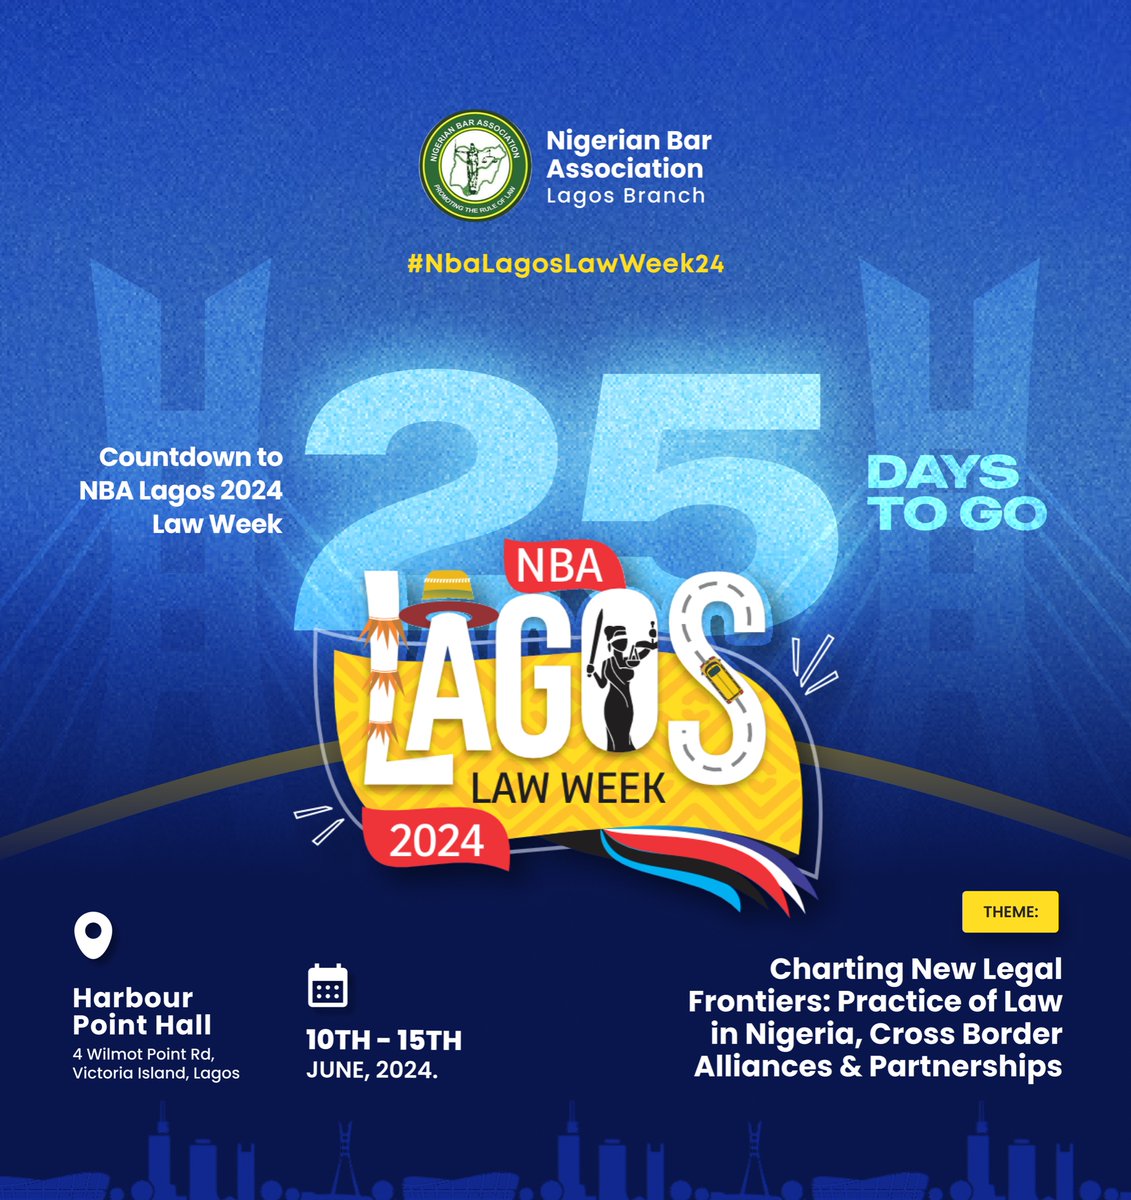 NBA LAGOS LAW WEEK 2024 
25 DAYS TO GO !!!💃🕺

The most anticipated event for the NBA Lagos Branch is almost here; THE NBA LAGOS LAW WEEK.